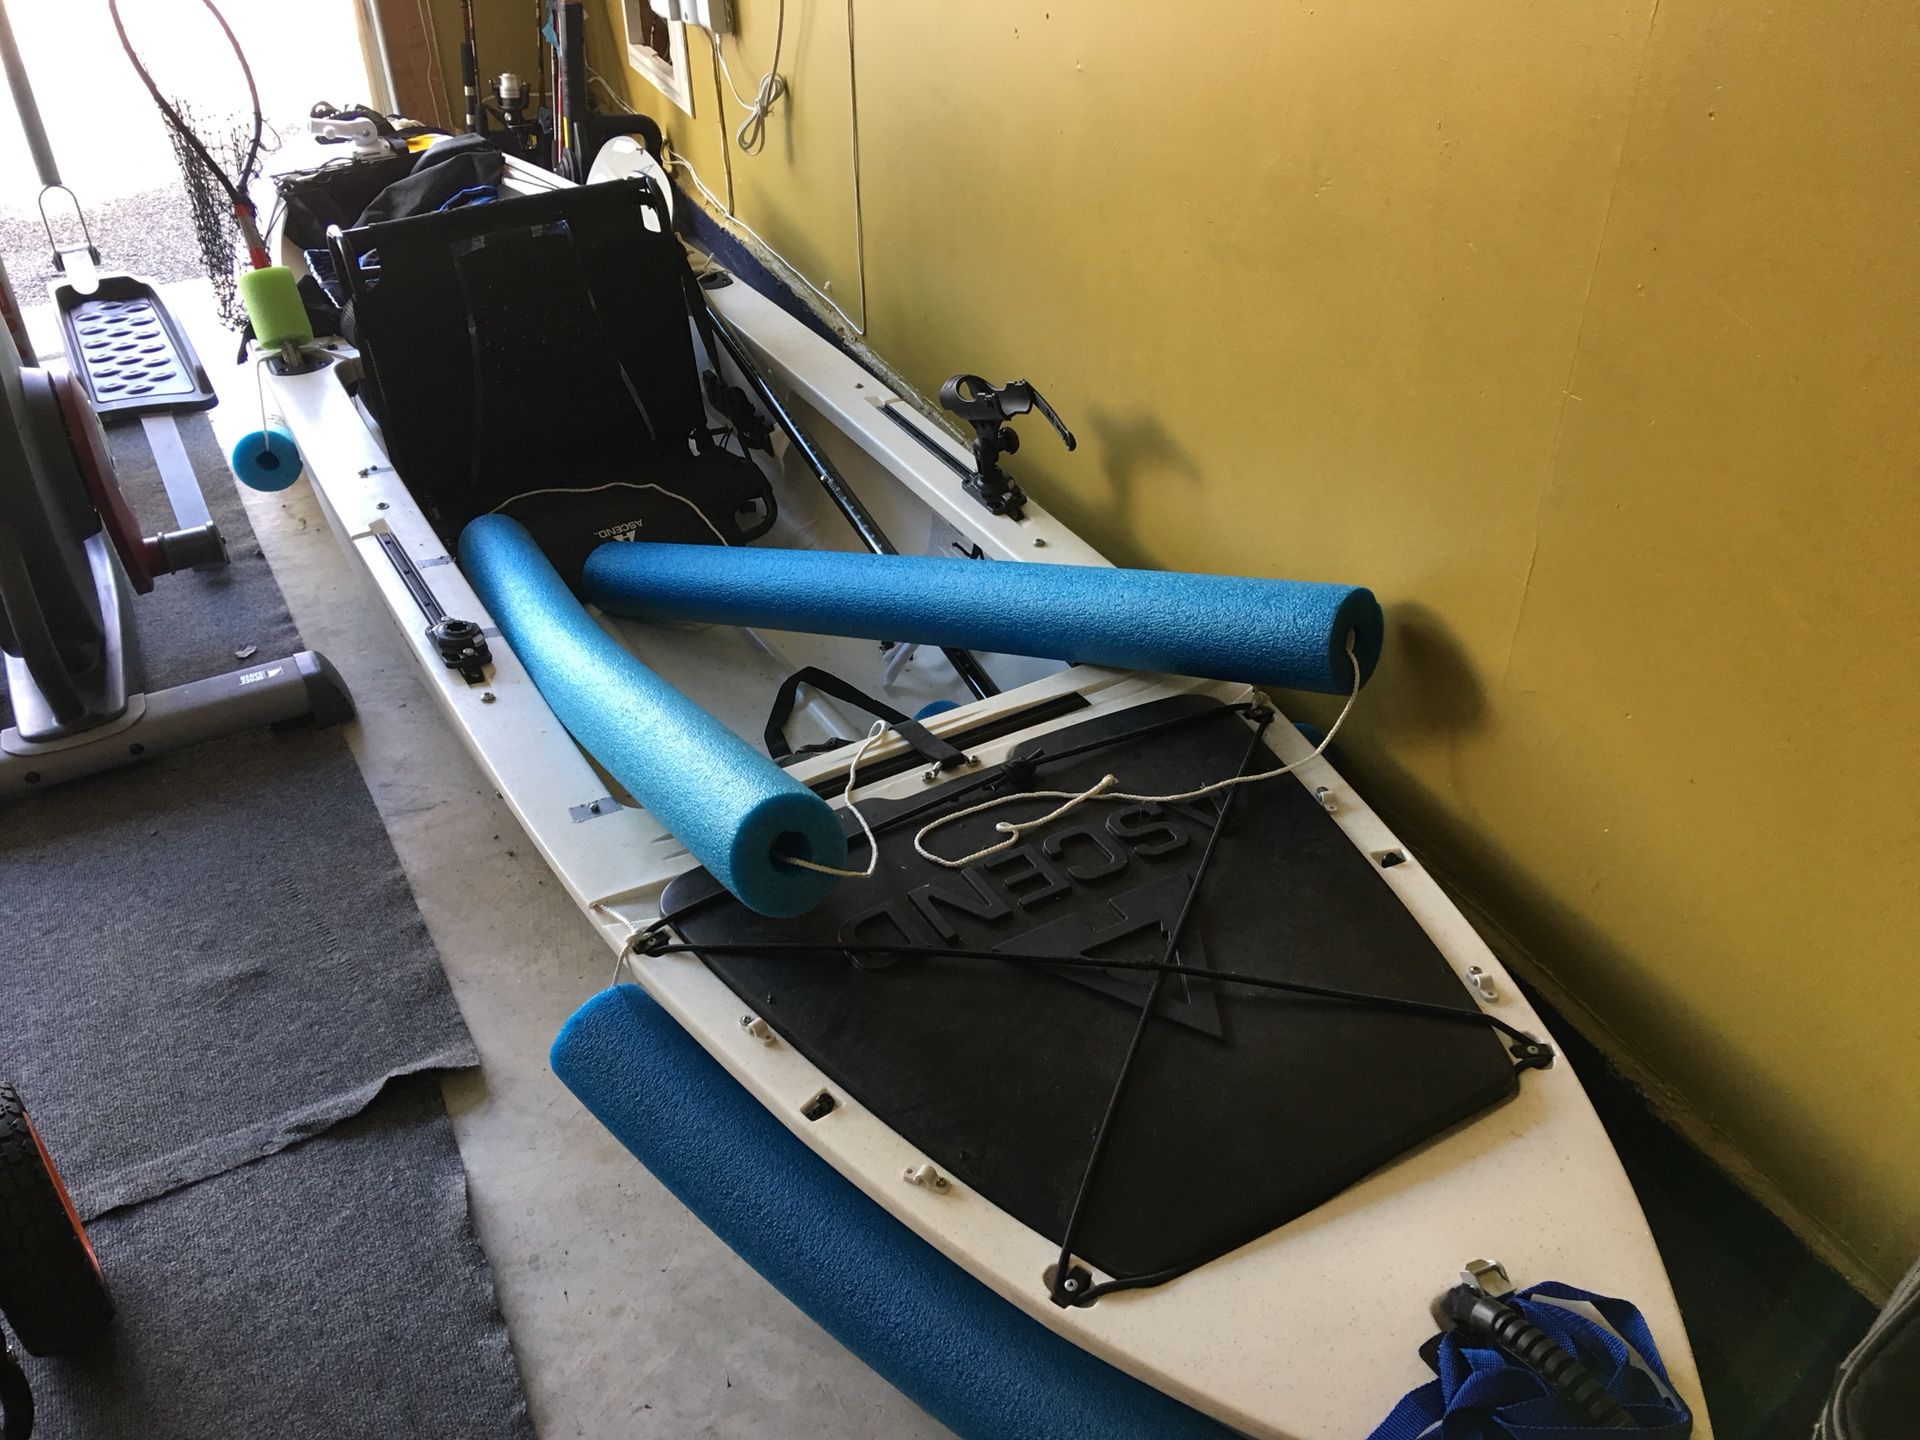 Ascend H12 hybrid kayak. Used three times, garage kept, perfect condition. Price-$500 firm, includes oar(upgraded), and other accessories!!